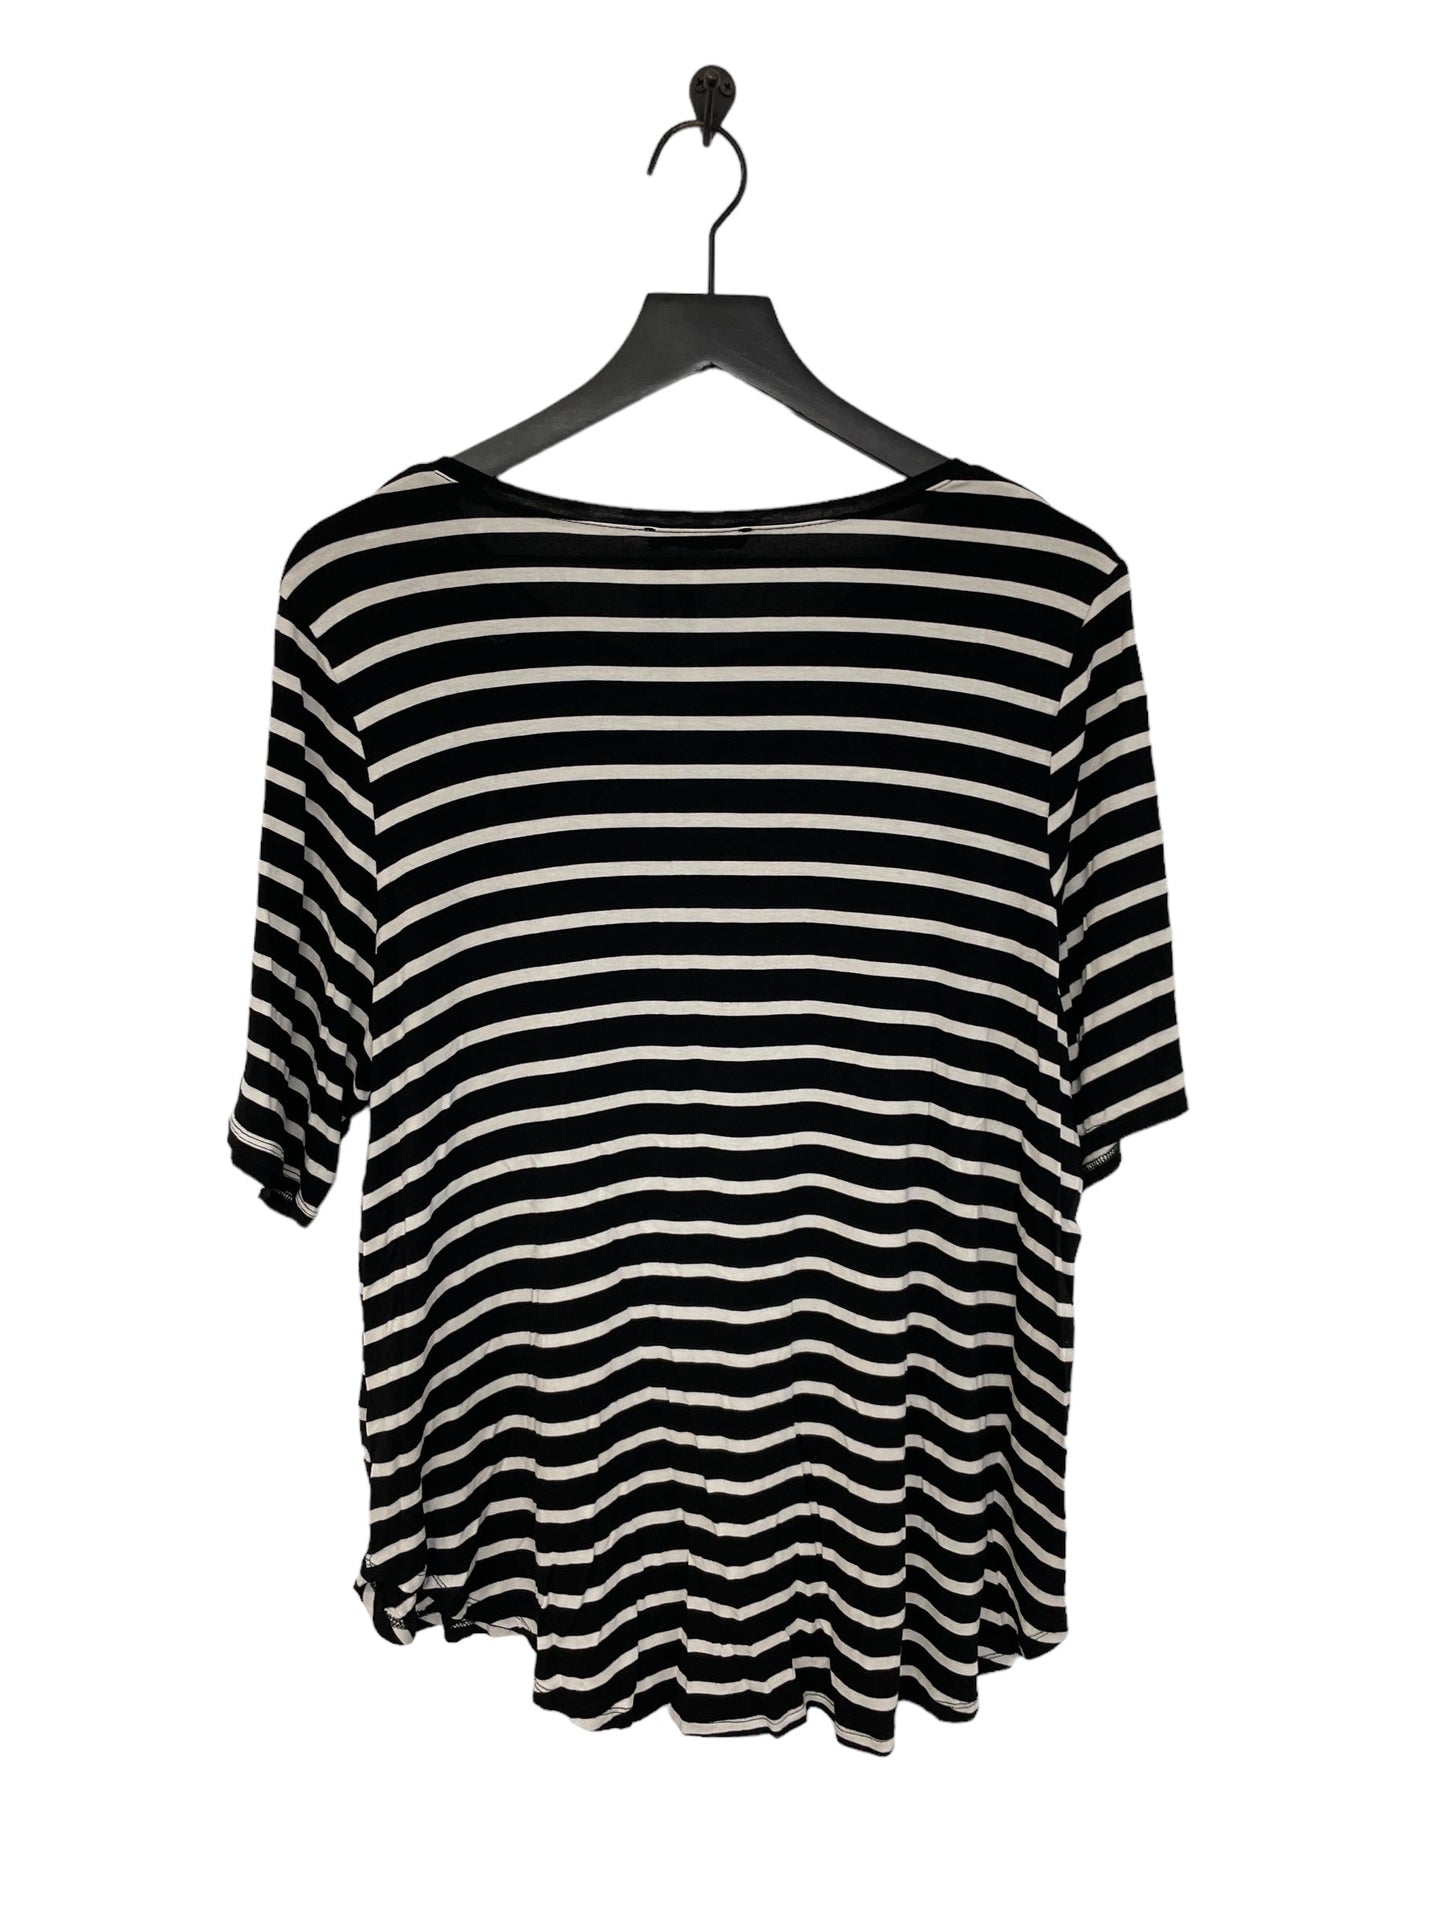 Black & White Top Short Sleeve Basic Cable And Gauge, Size 1x